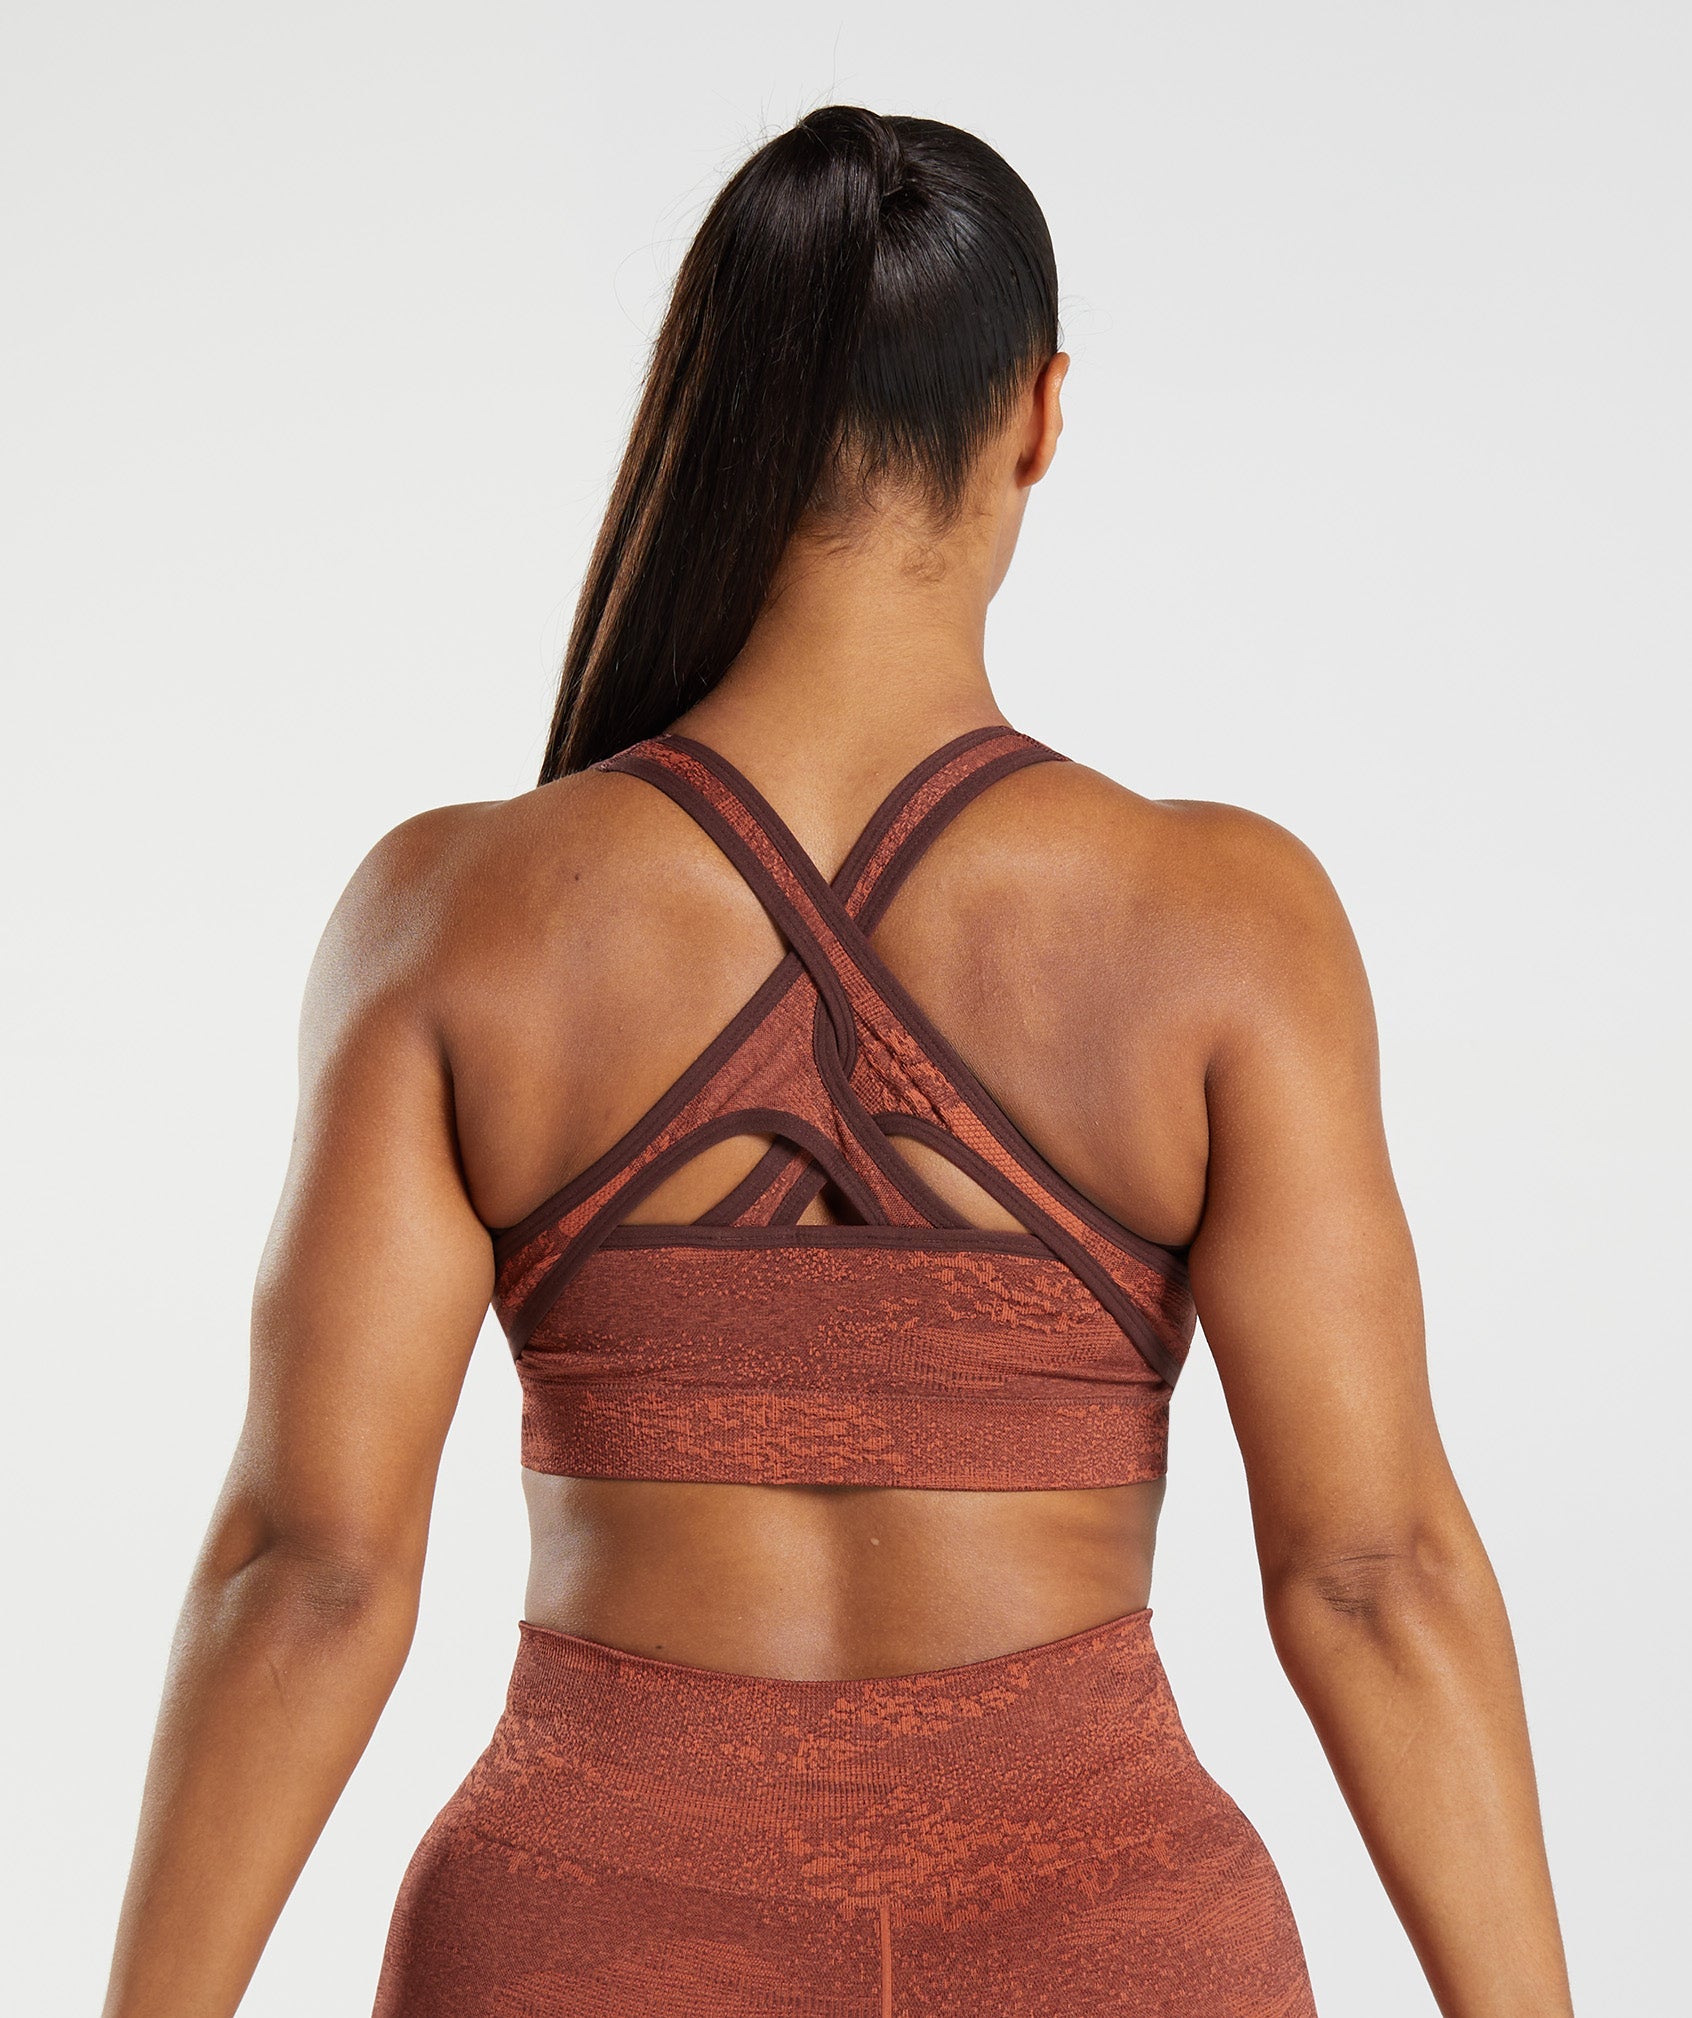 Adapt Camo Seamless Sports Bra in Storm Red/Cherry Brown - view 2